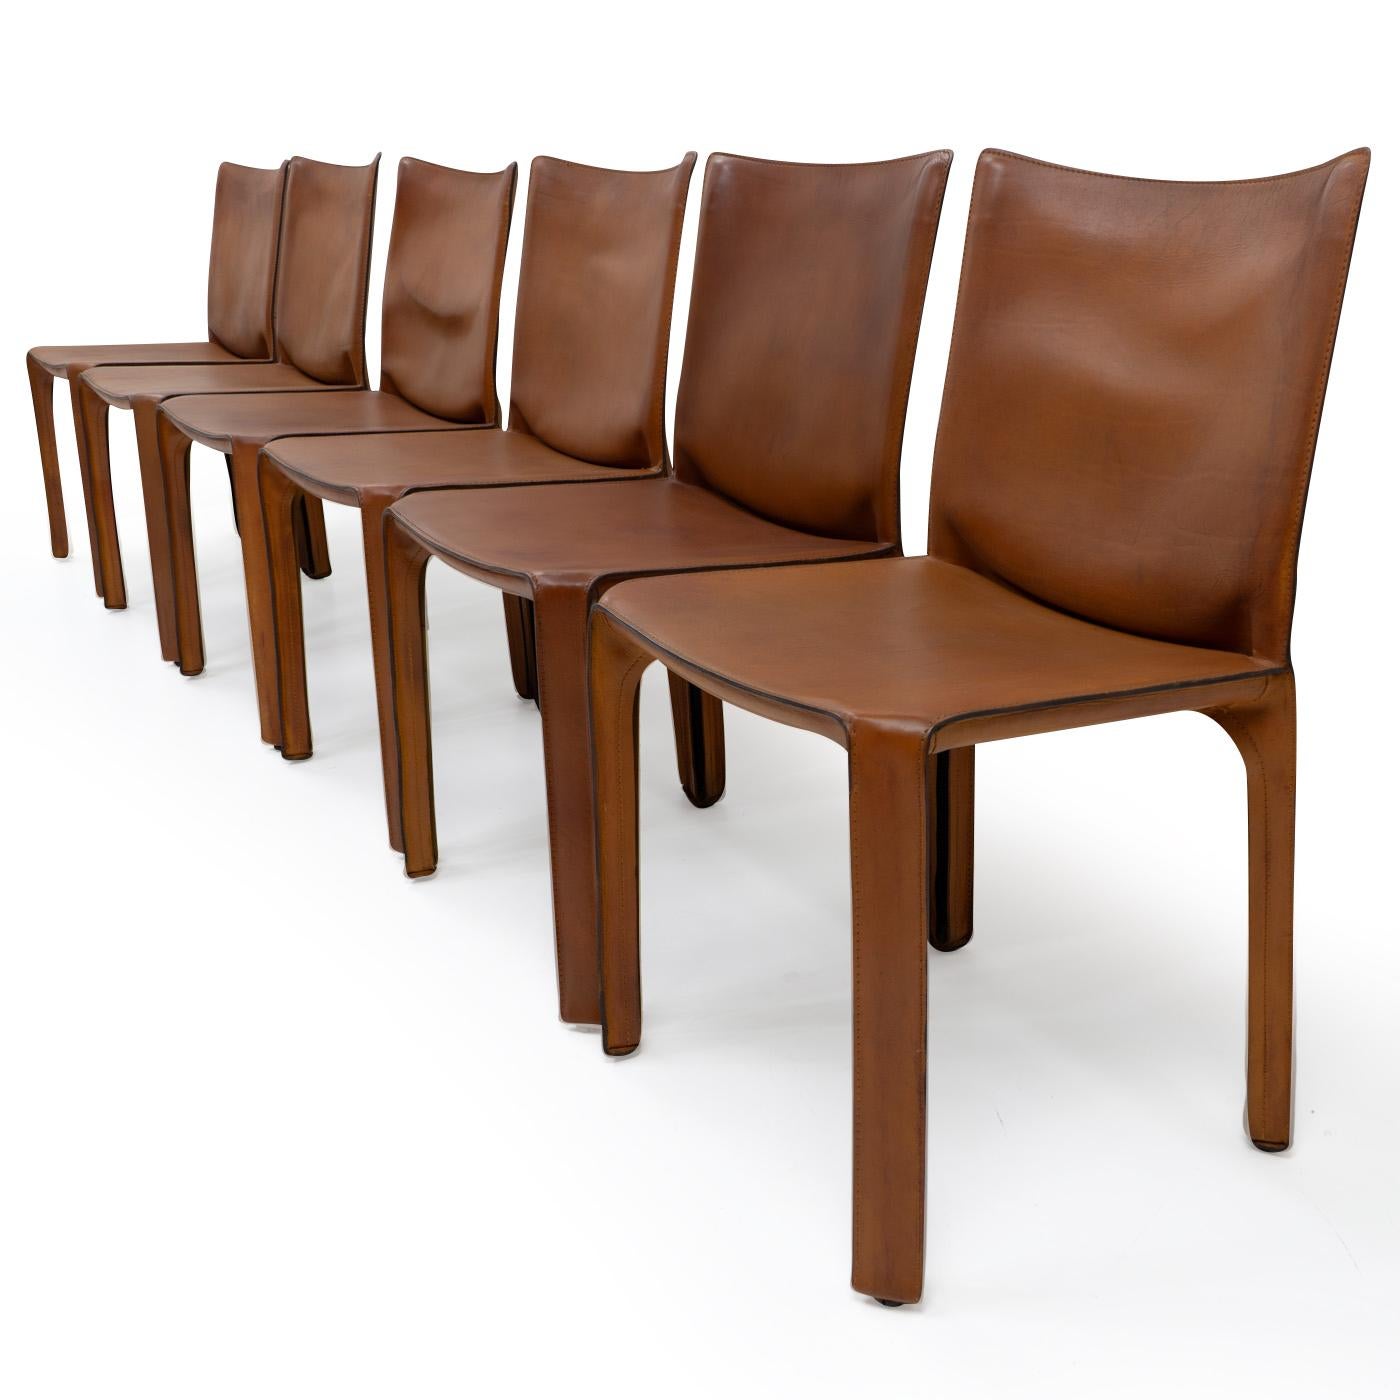 Mid-Century Modern Italian Design Classic Cab 412 Chairs by Mario Bellini for Cassina, Set of Six